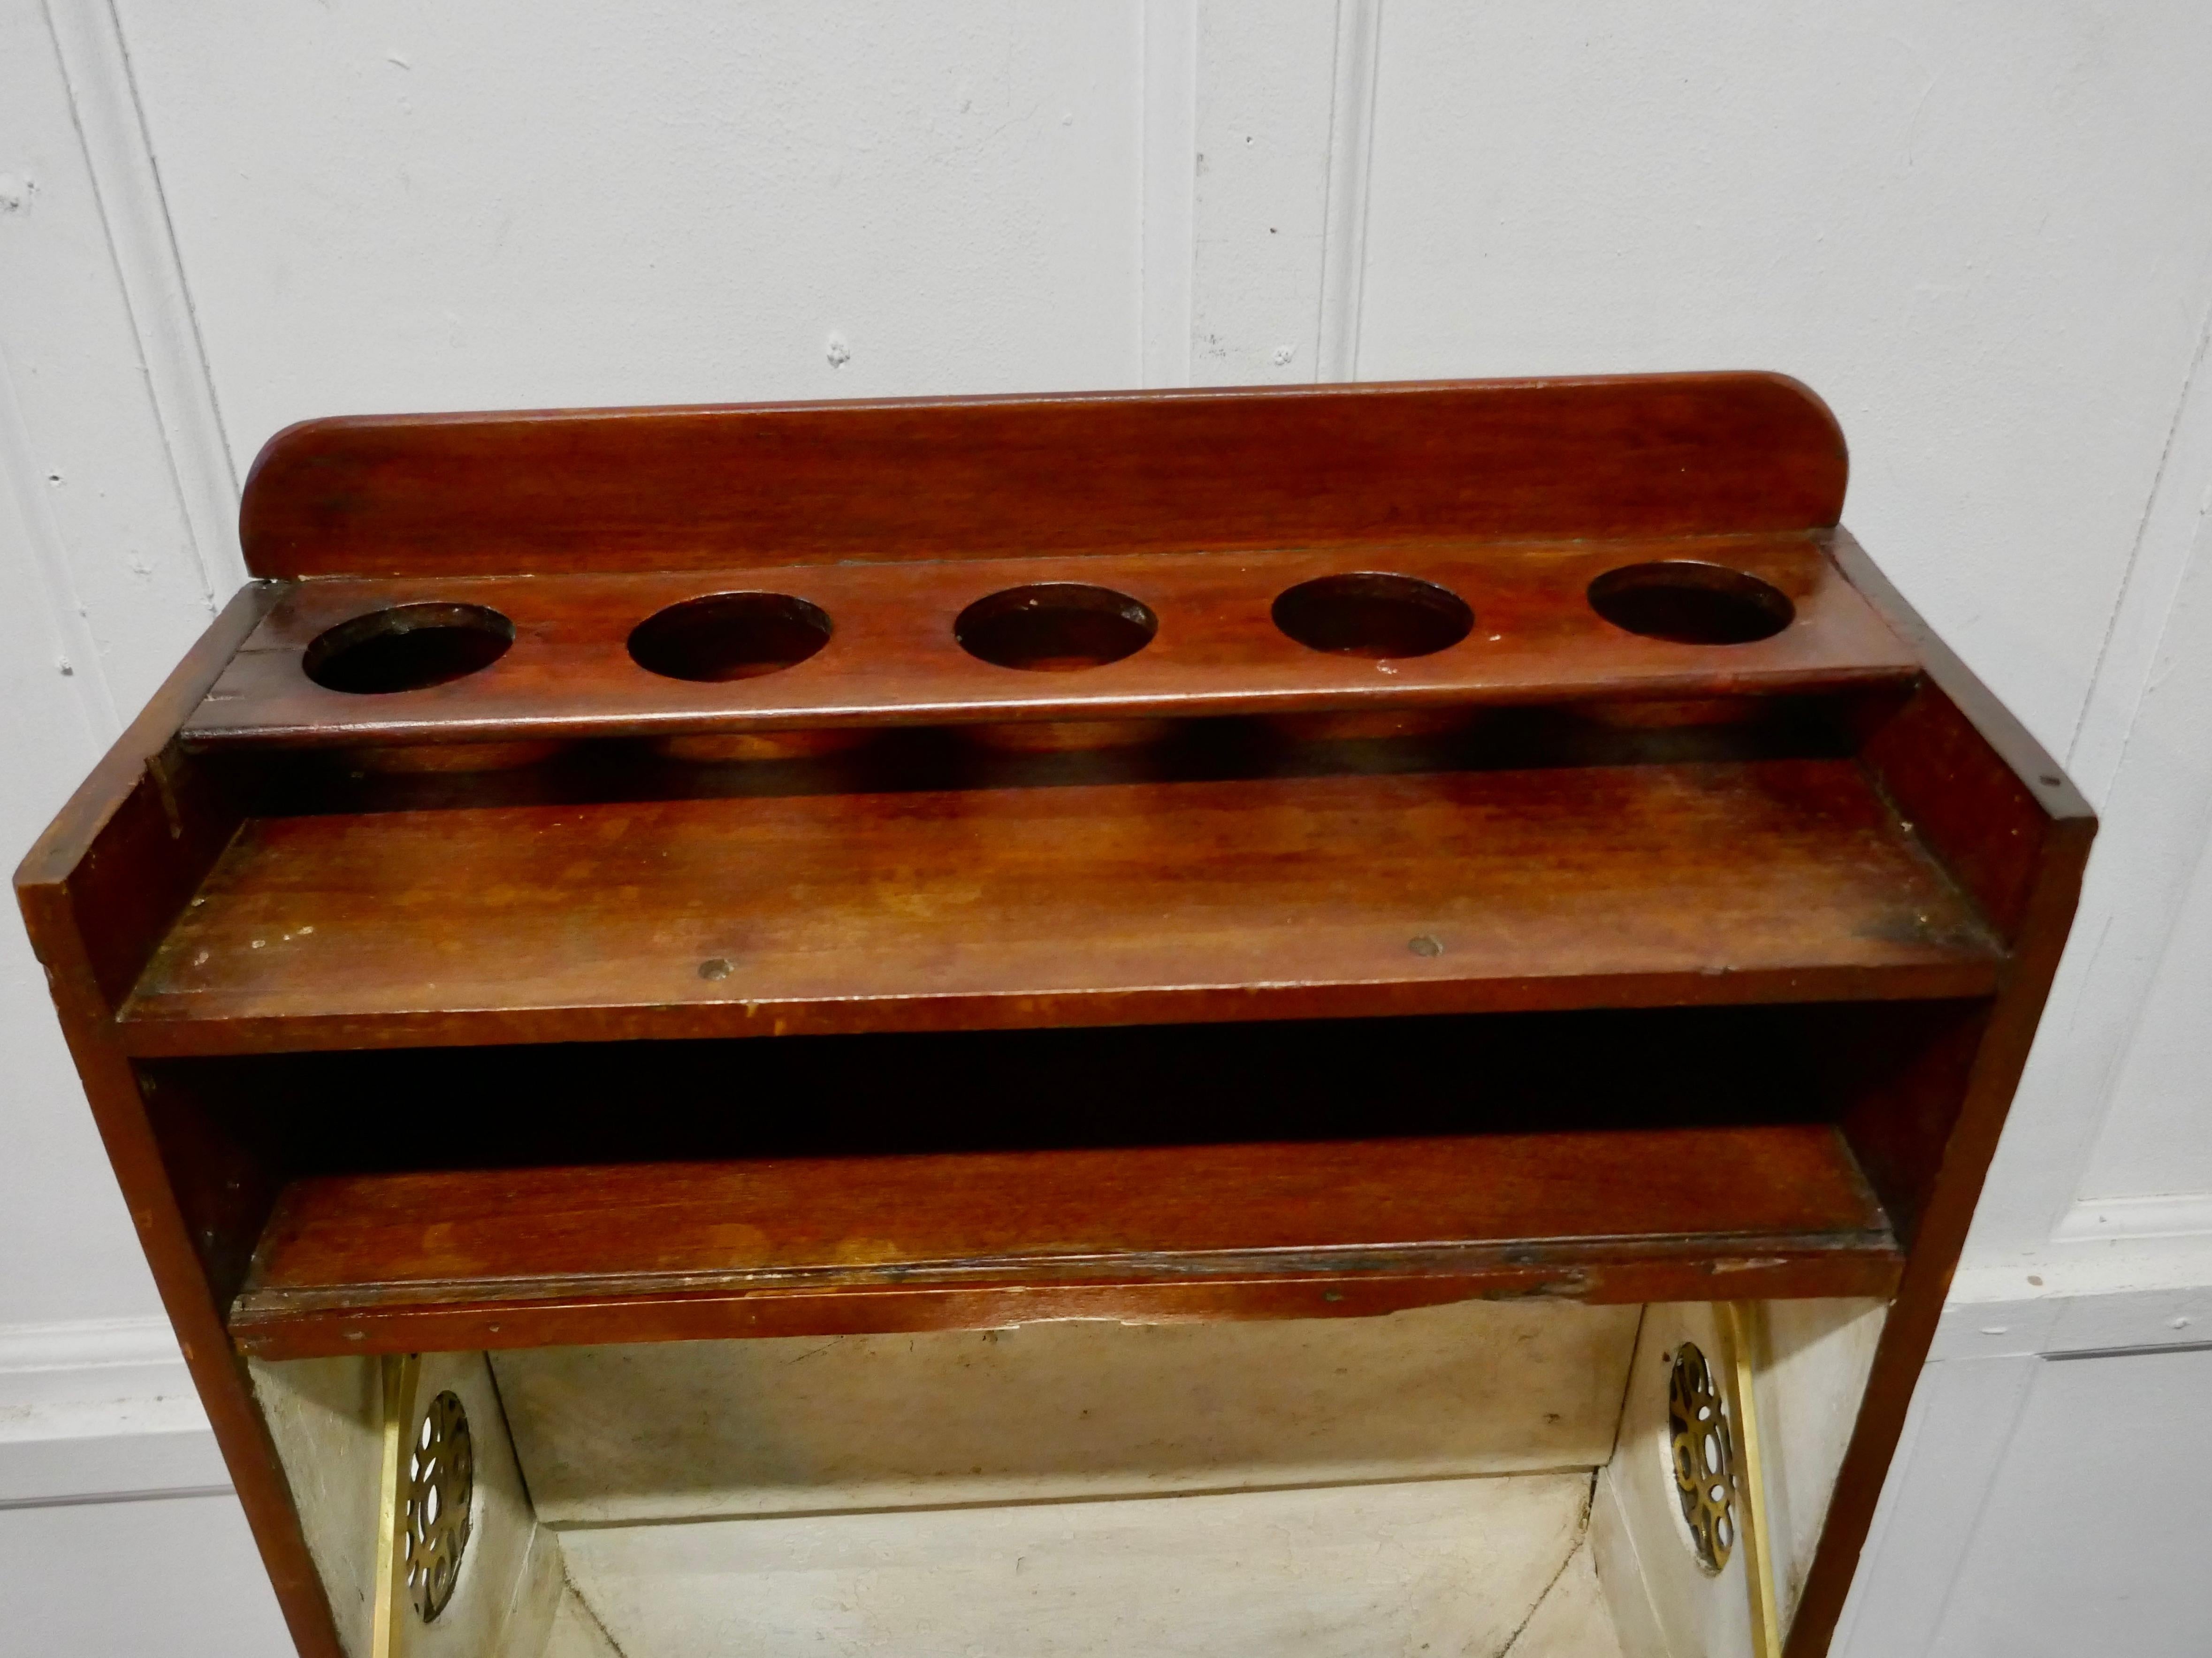 19th century Art Deco Pullman style mahogany and steel ships fold away sink

This is a fold away sink, these were used on ocean liners and railways in the 19th century
The cabinet is made in mahogany, the fittings are in brass and the original